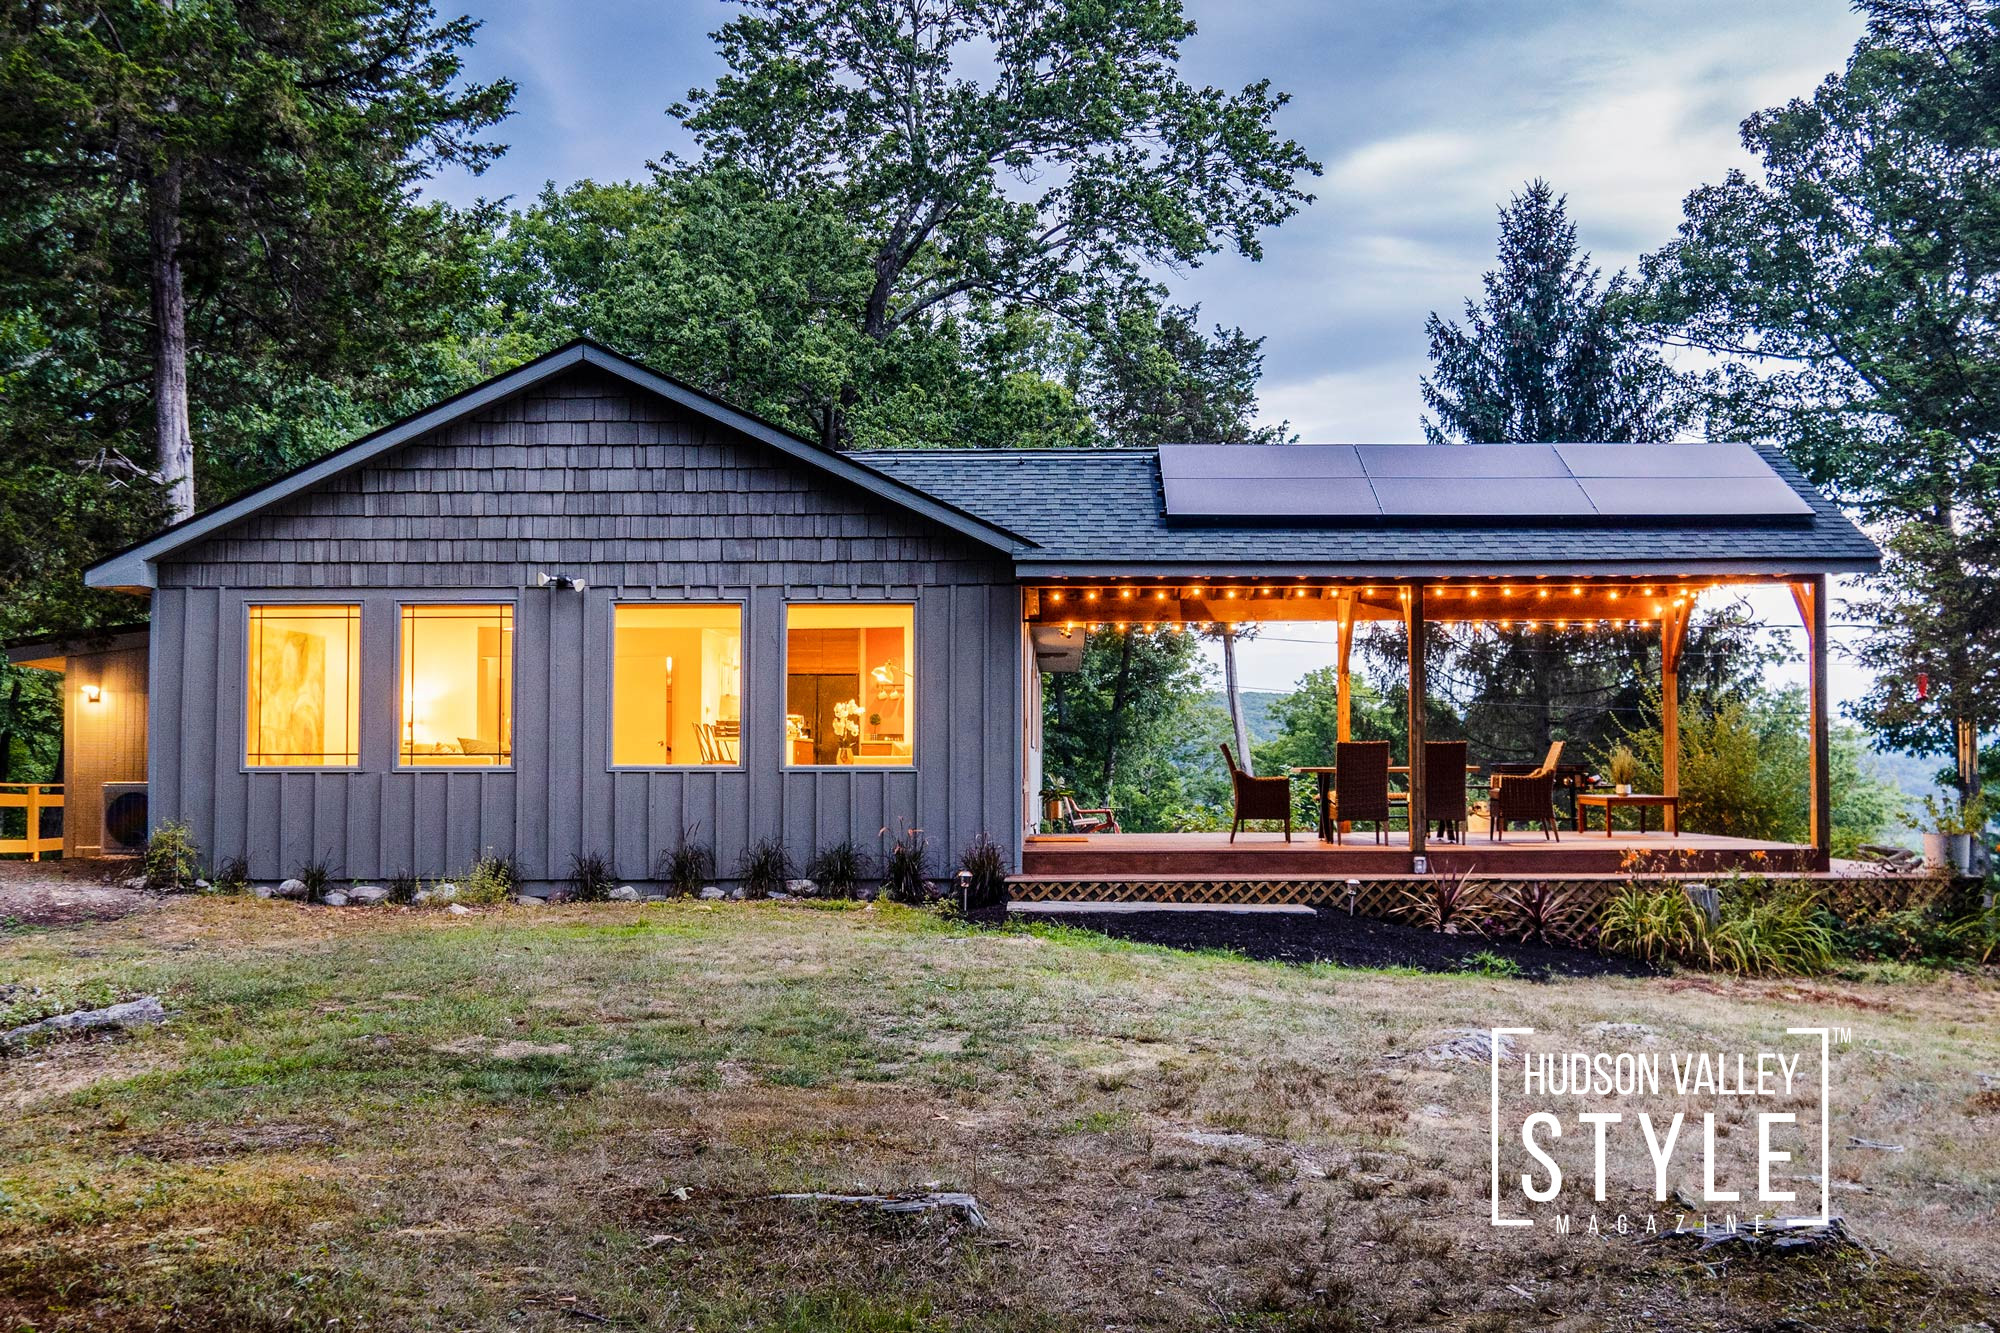 Experience the Magic of Hudson Valley at this Secluded Modern Rustic Mountain CabinExperience the Magic of Hudson Valley and Upstate, NY at this Secluded Modern Rustic Mountain Cabin – Airbnb Photography by Alluvion Media – Vacation Rental Management by Alluvion Vacations